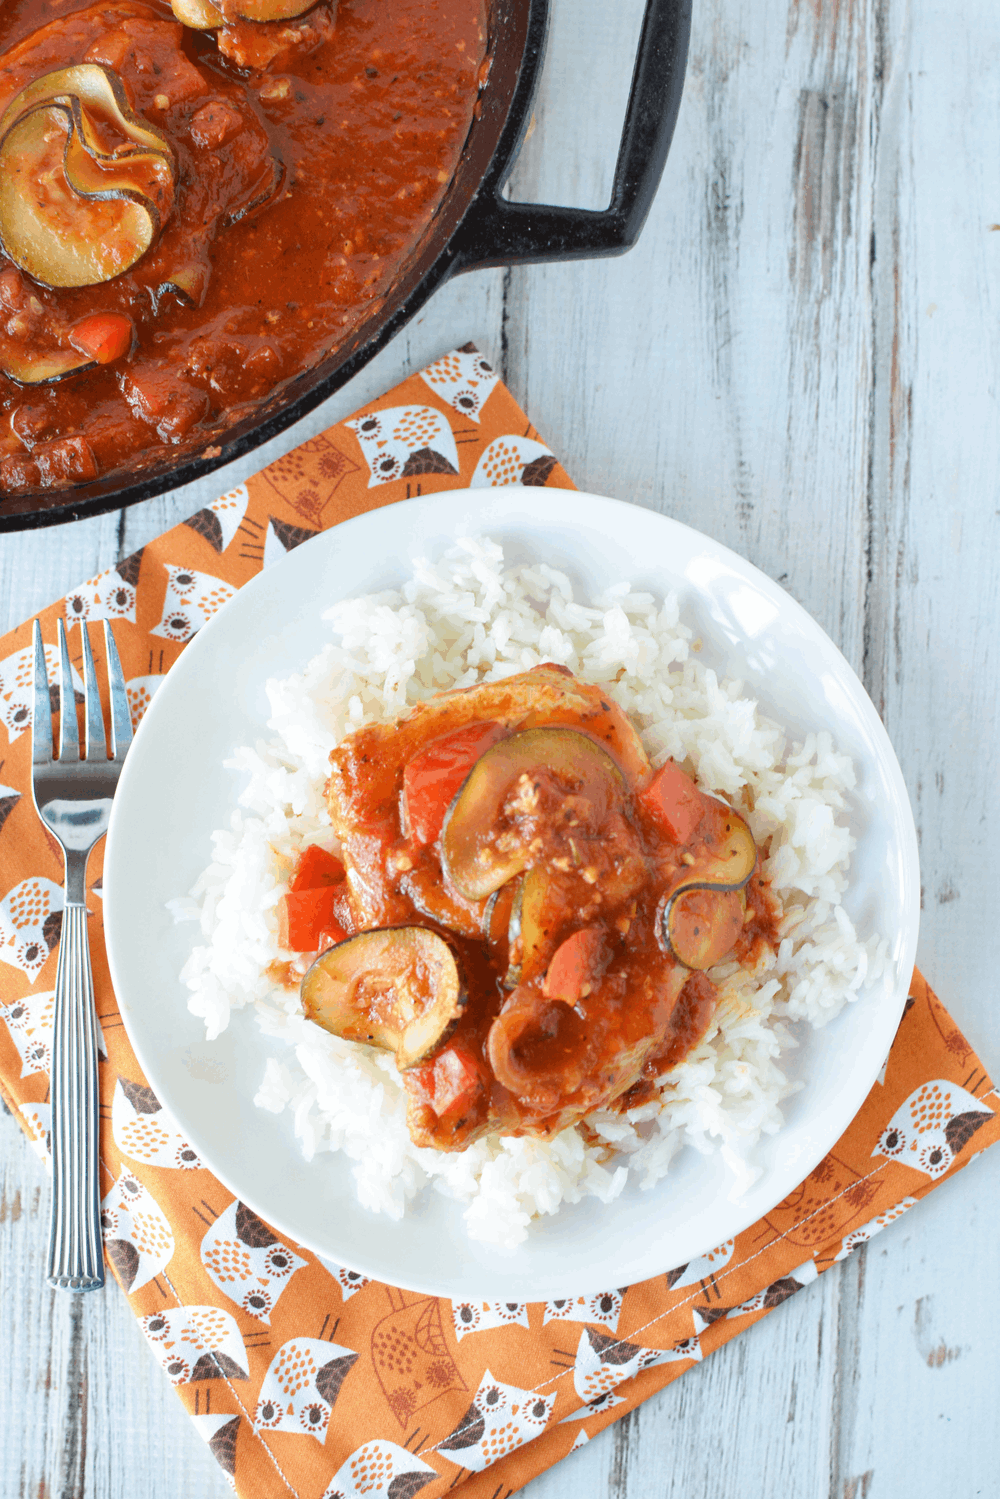 Pork Chops with tomato sauce over a bed of white rice